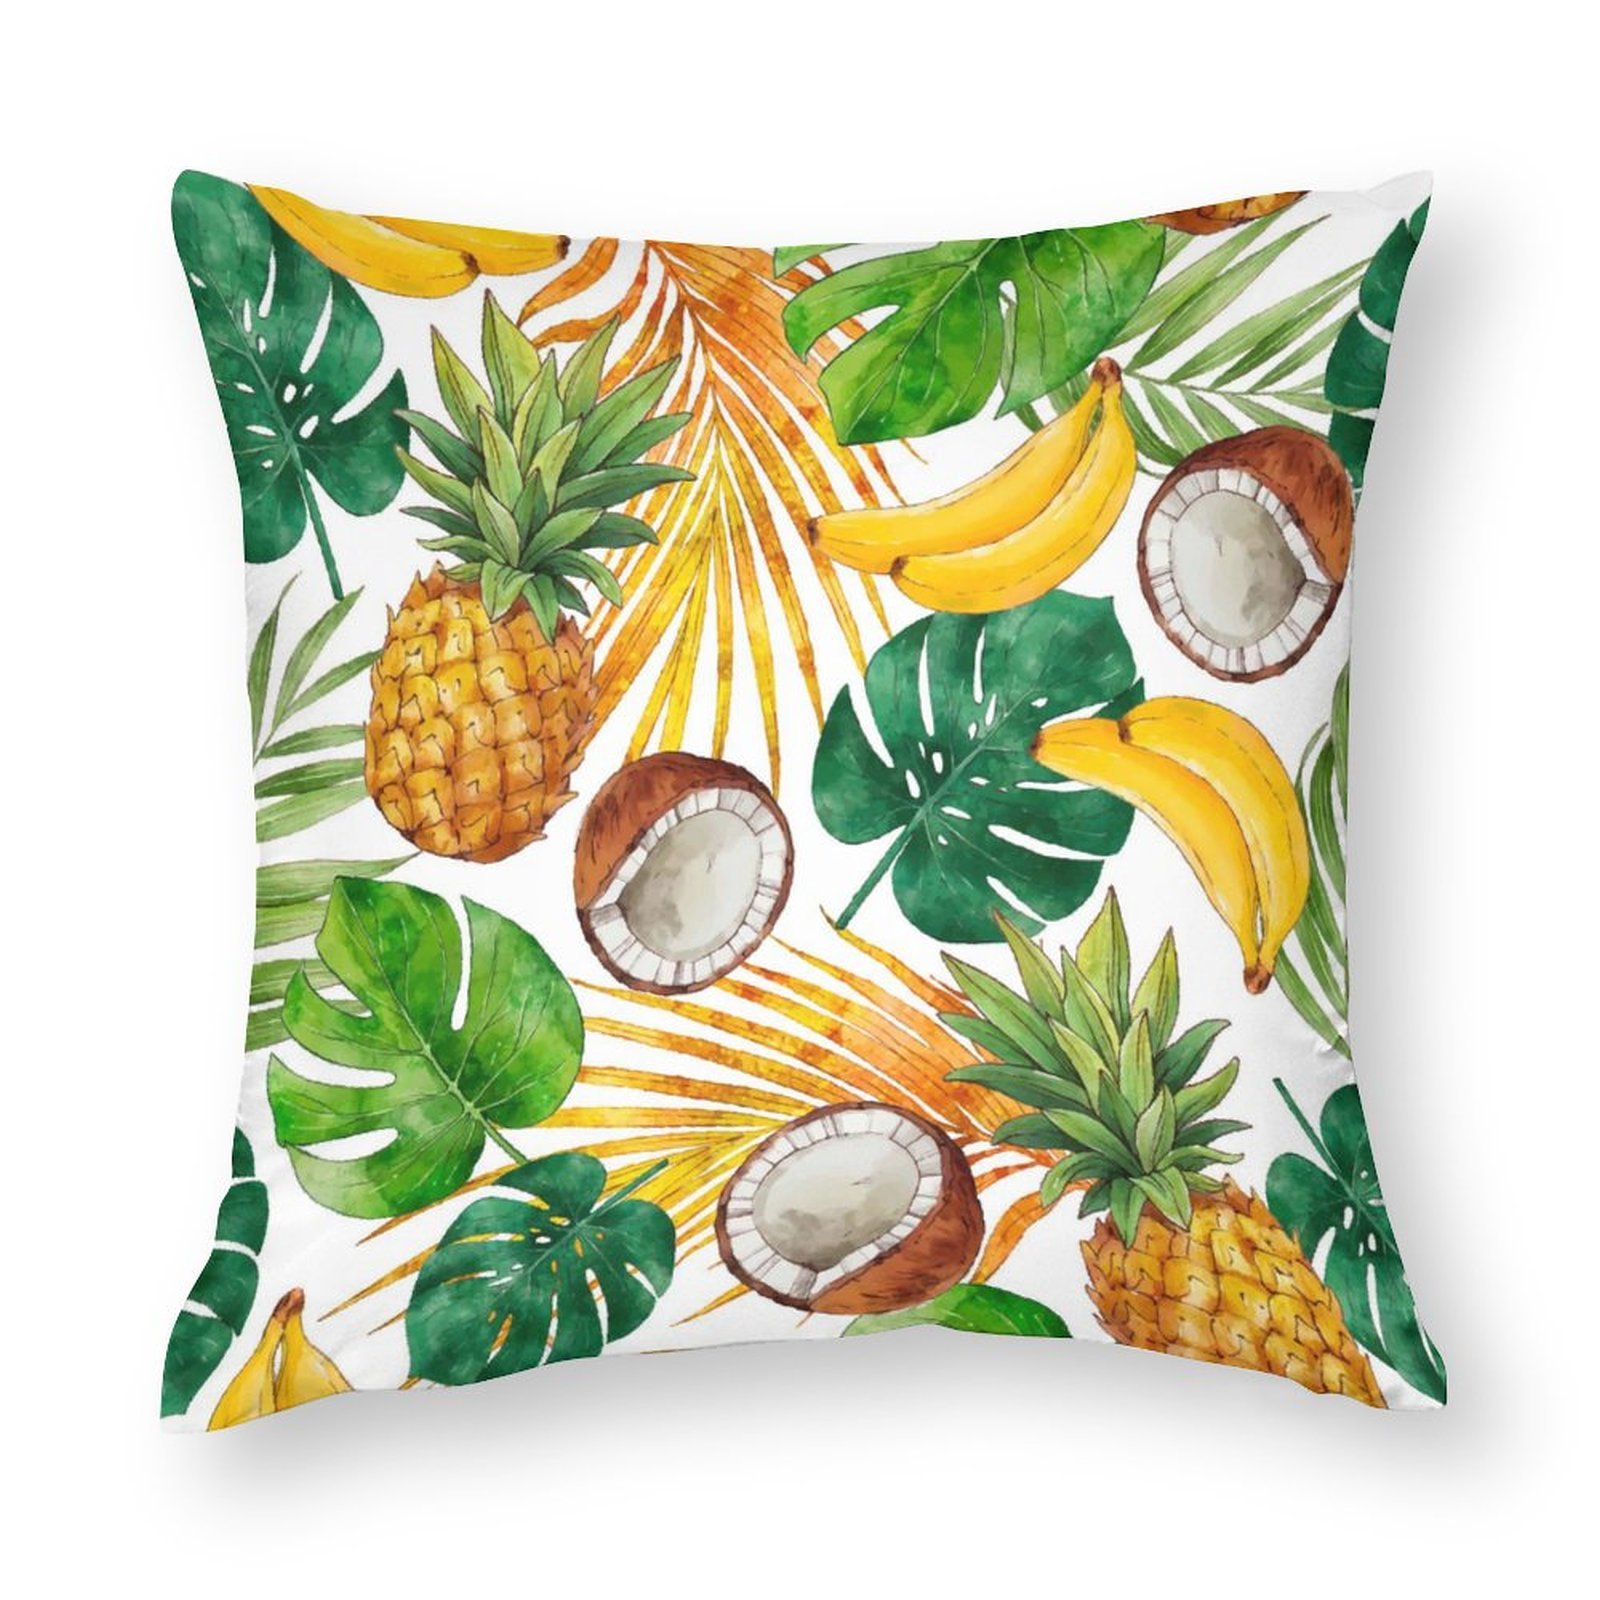 Mondxflaur Yellow Pineapple Pillow Case Covers for Sofas Polyester Decorative - £8.80 GBP - £11.21 GBP